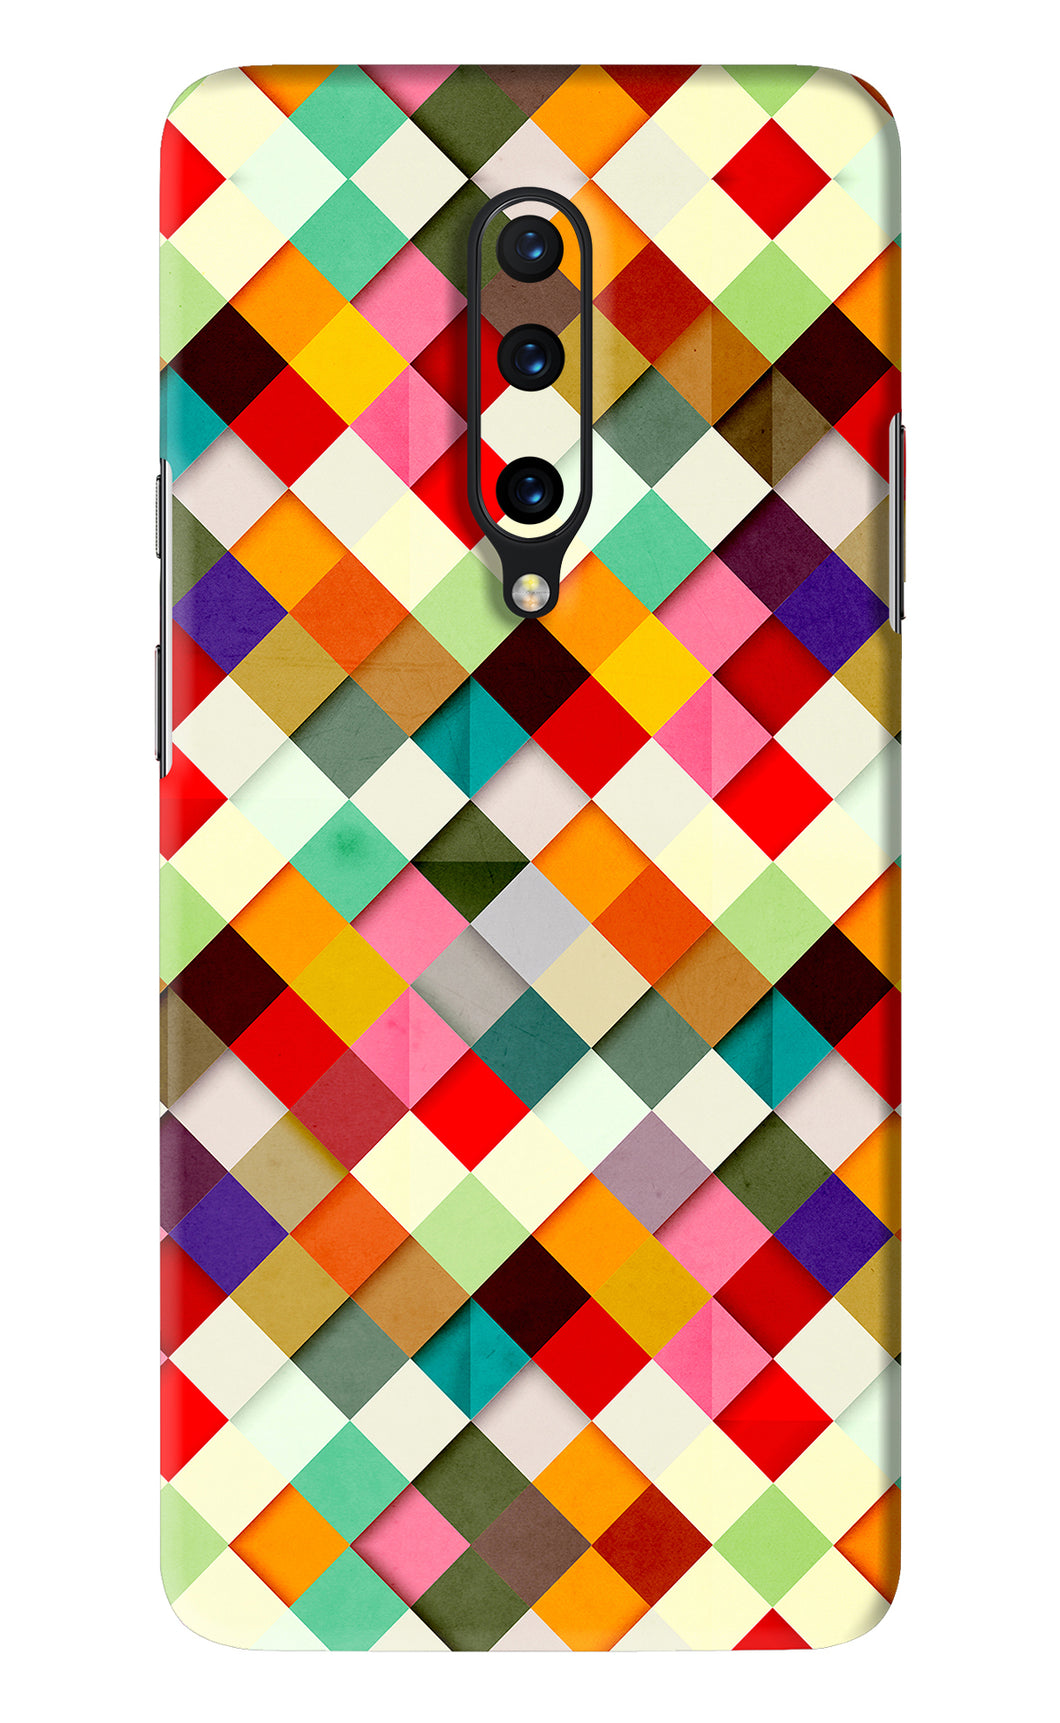 Geometric Abstract Colorful OnePlus 7 Pro Back Skin Wrap